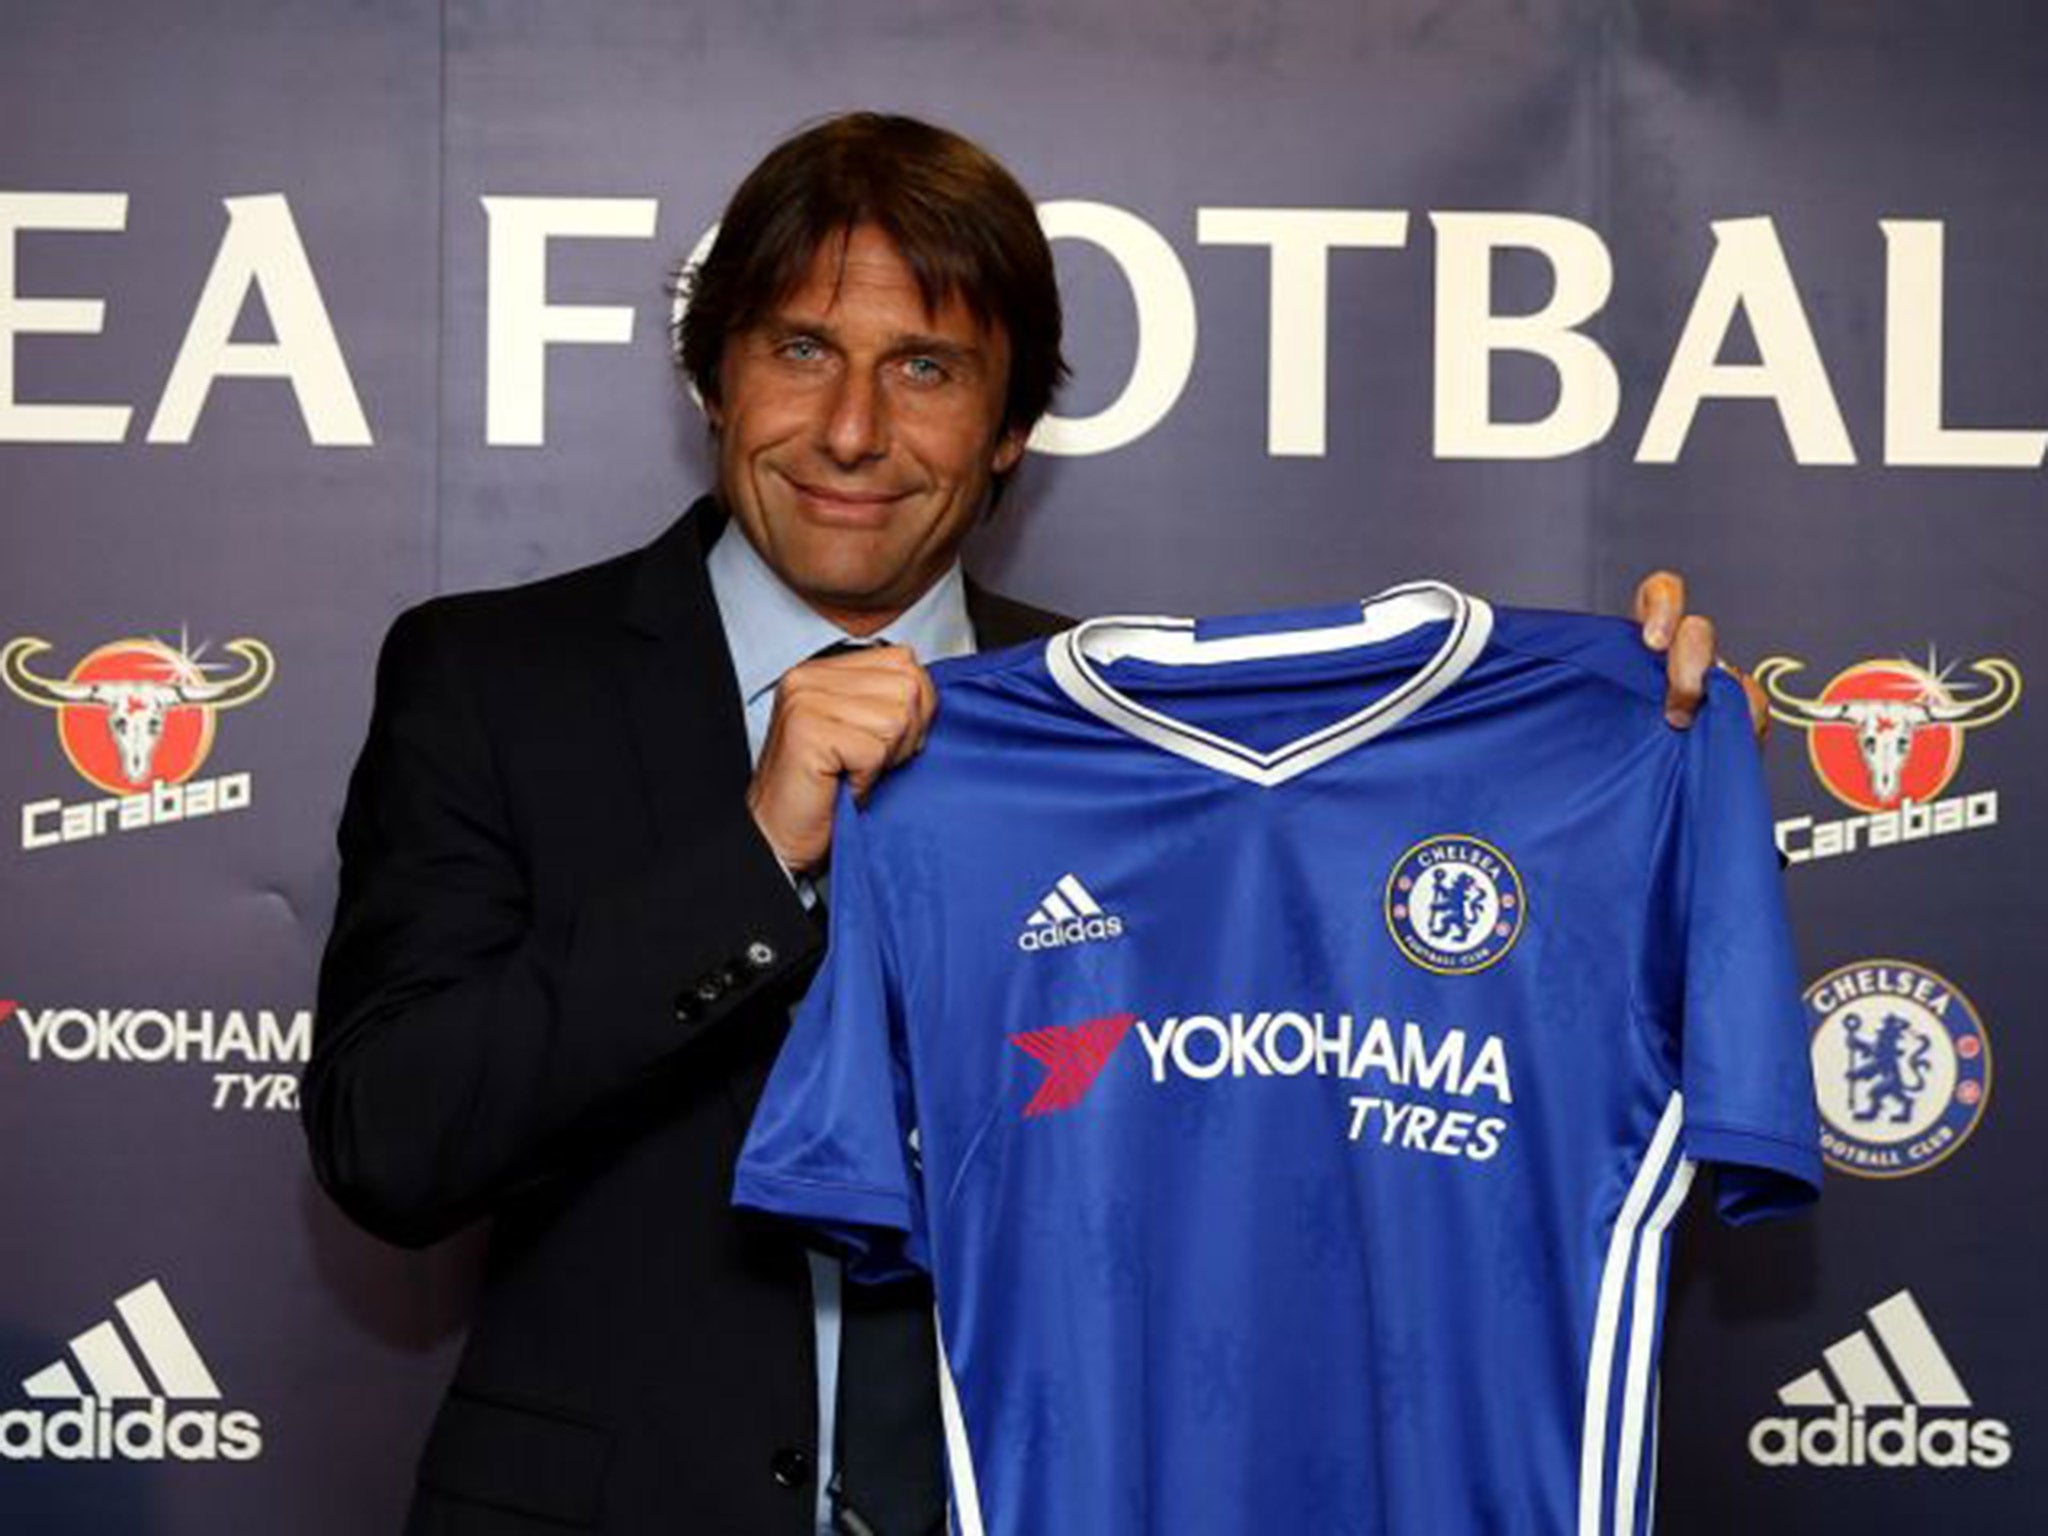 Antonio Conte is unveiled as the new manager of Chelsea